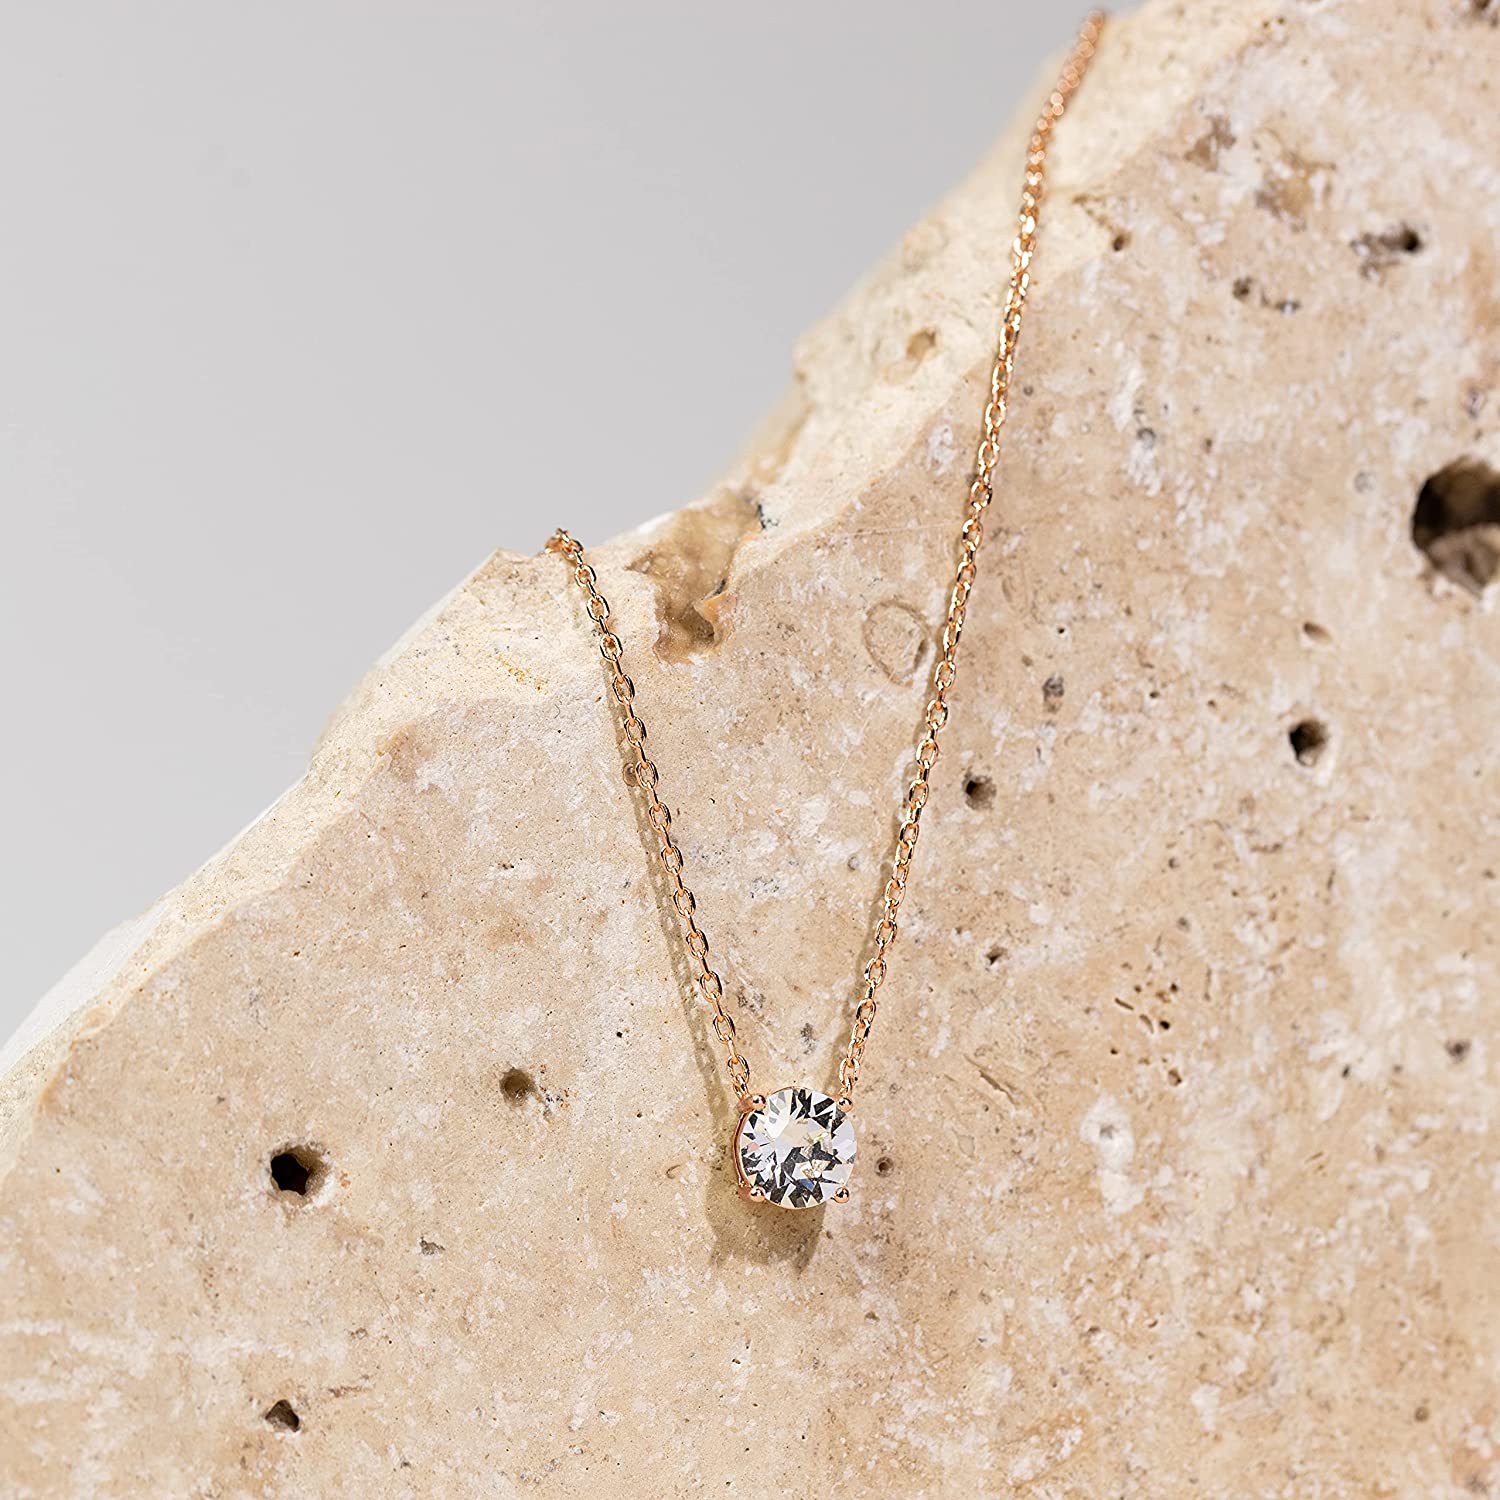 solitaire necklace for women, sterling silver necklace, silver gemstone necklace, cubic zirconia necklace